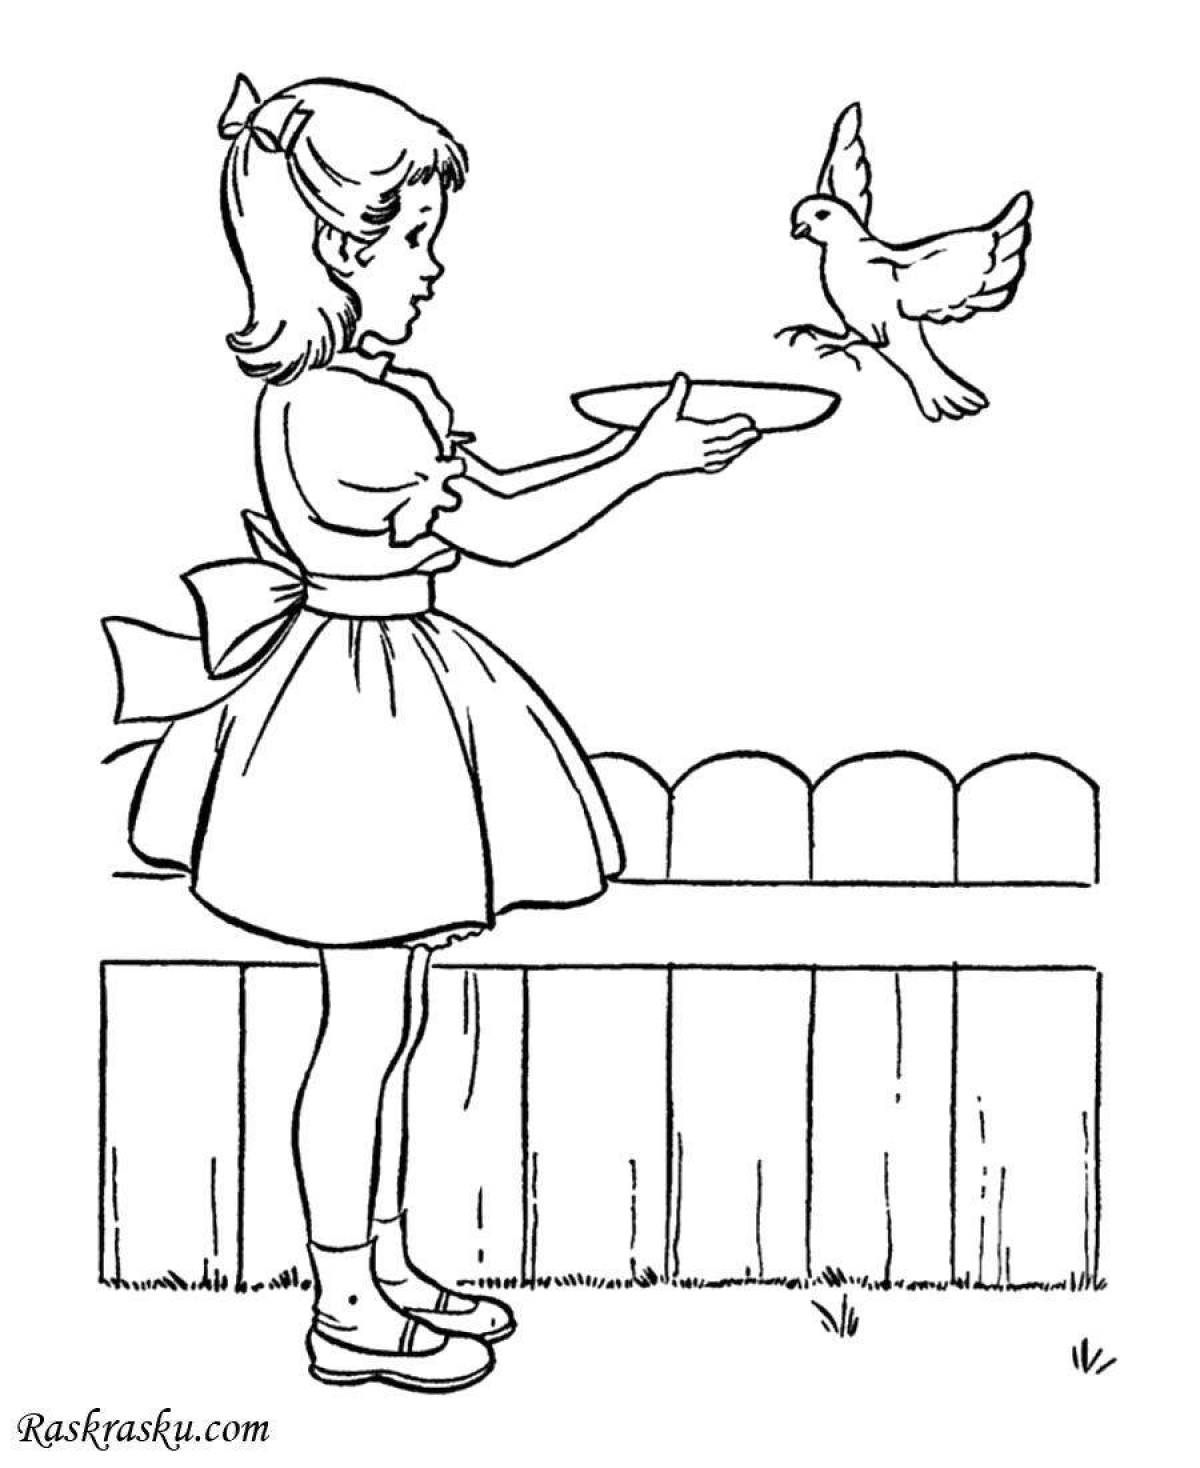 Coloring book funny disheveled sparrow